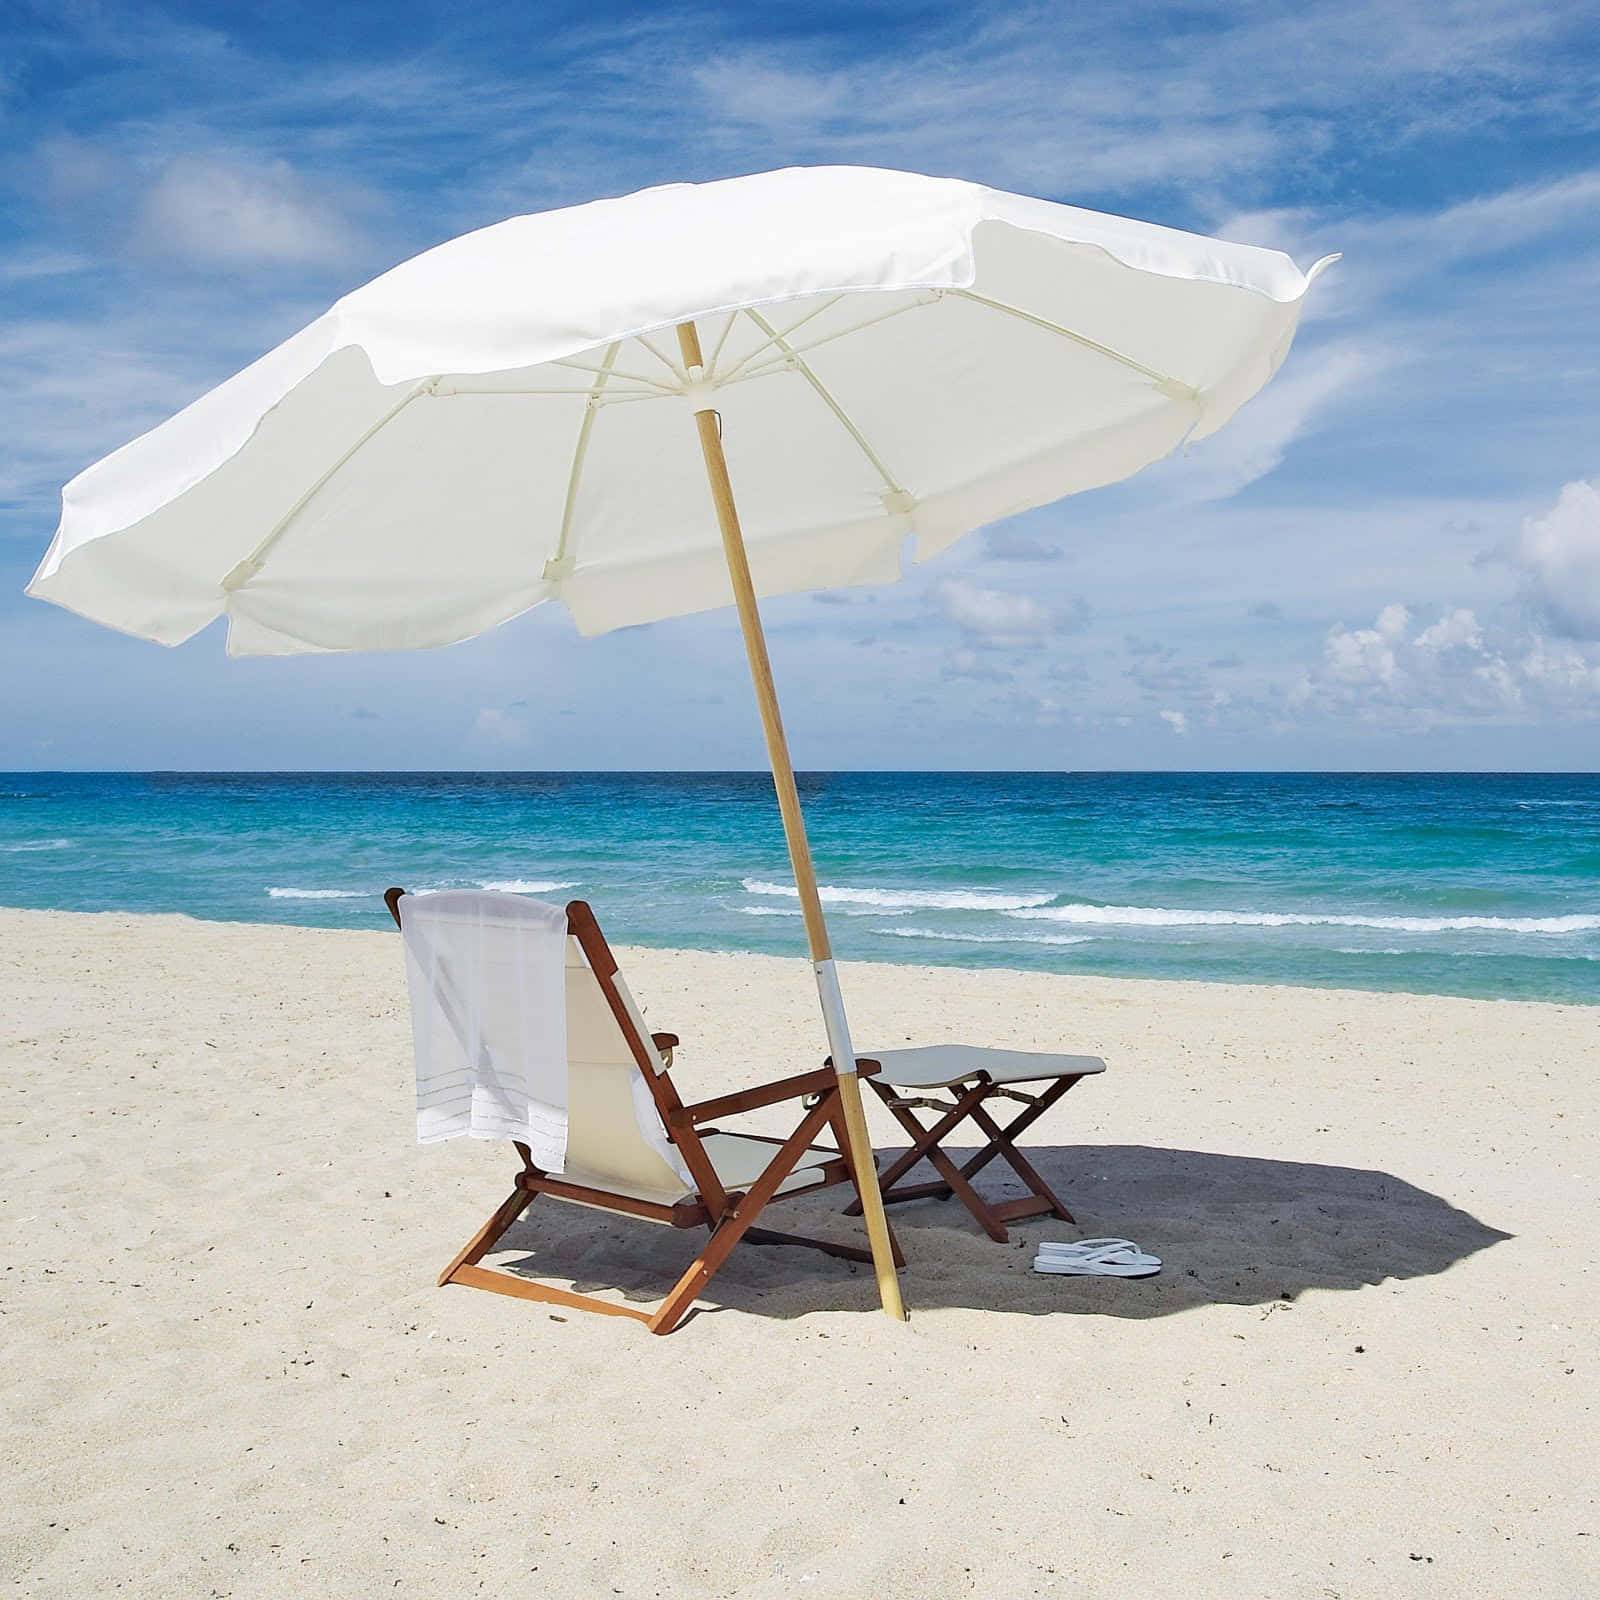 Tropical Beach with Colorful Umbrella and Sun Chairs Wallpaper